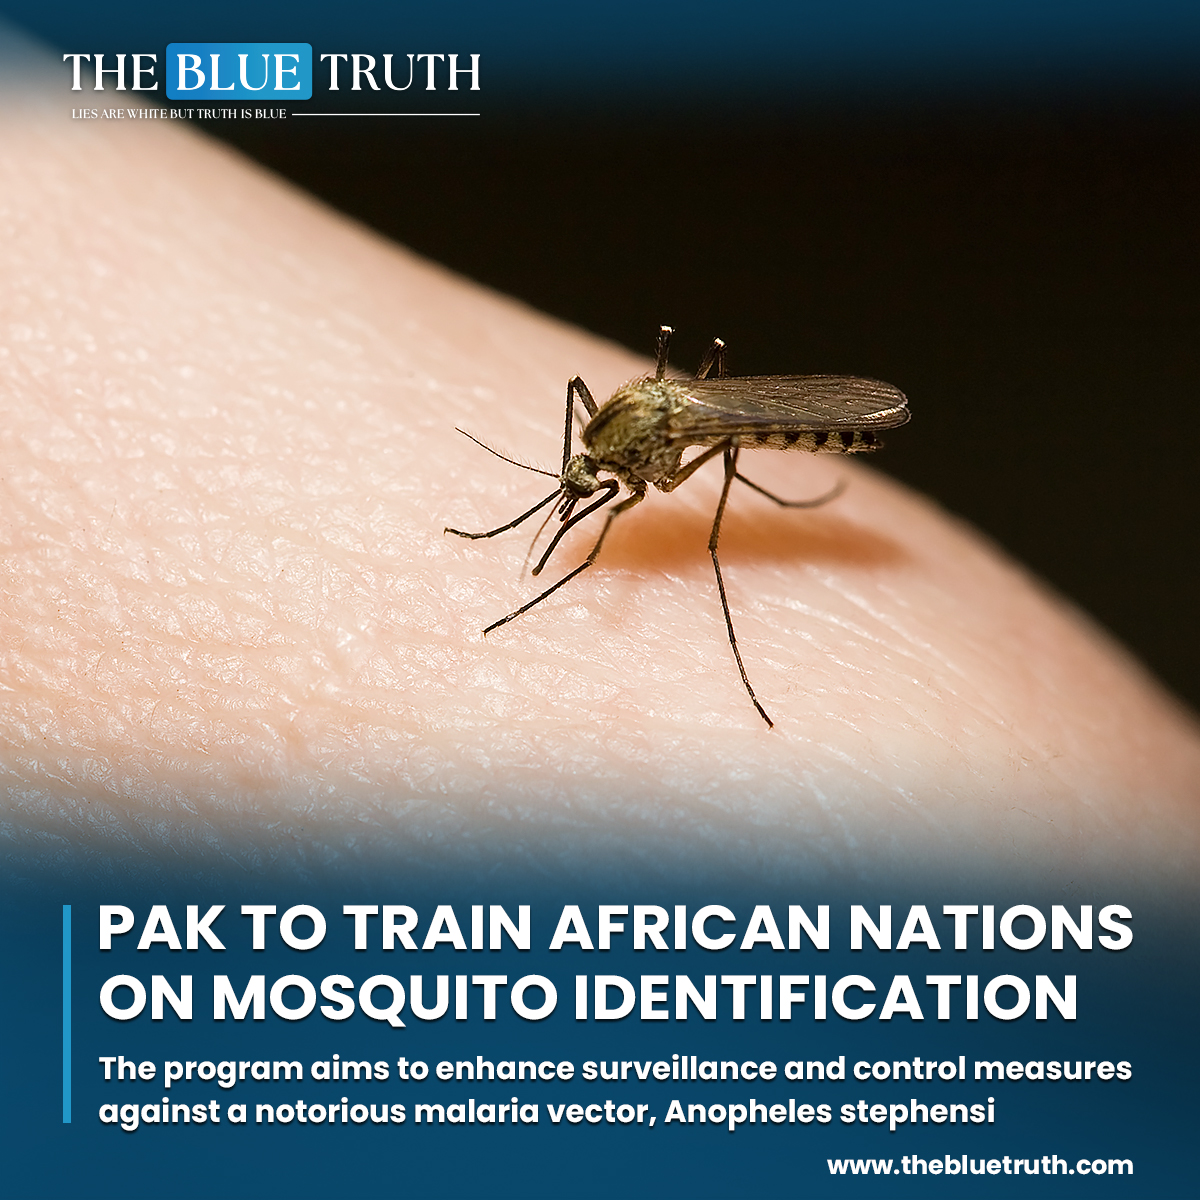 Pakistan has been chosen to spearhead the International Exchange Programme aimed at tackling the spread of Anopheles stephensi

#PakistanLeadership #InternationalExchange #MalariaControl
#AnophelesStephensi #MalariaVector #PublicHealth #GlobalHealthInitiative #tbt #thebluetruth